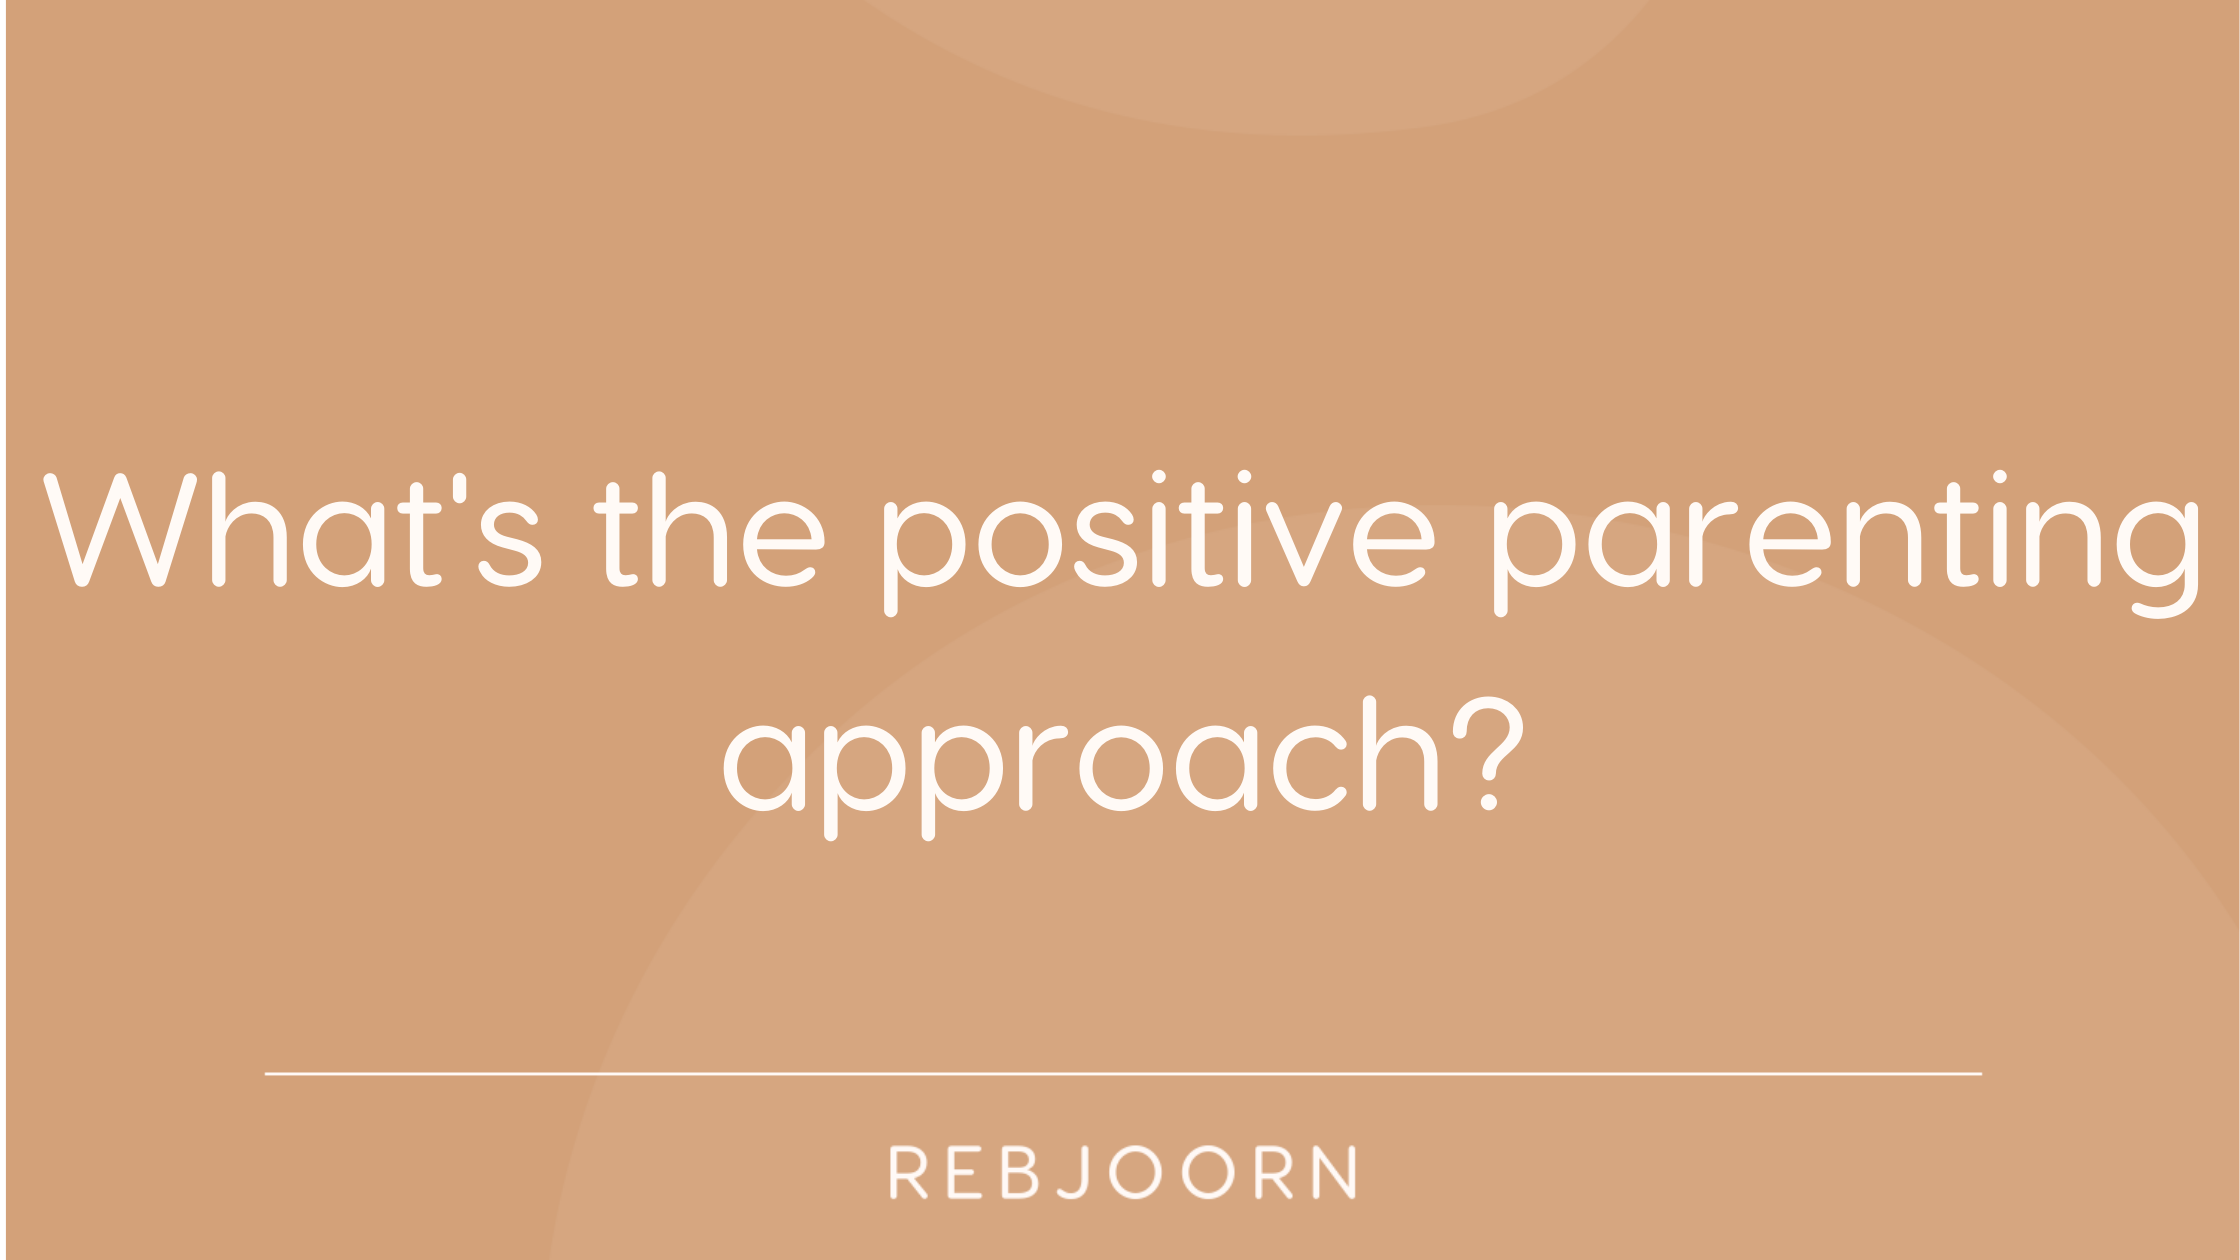 What is the positive parenting approach?